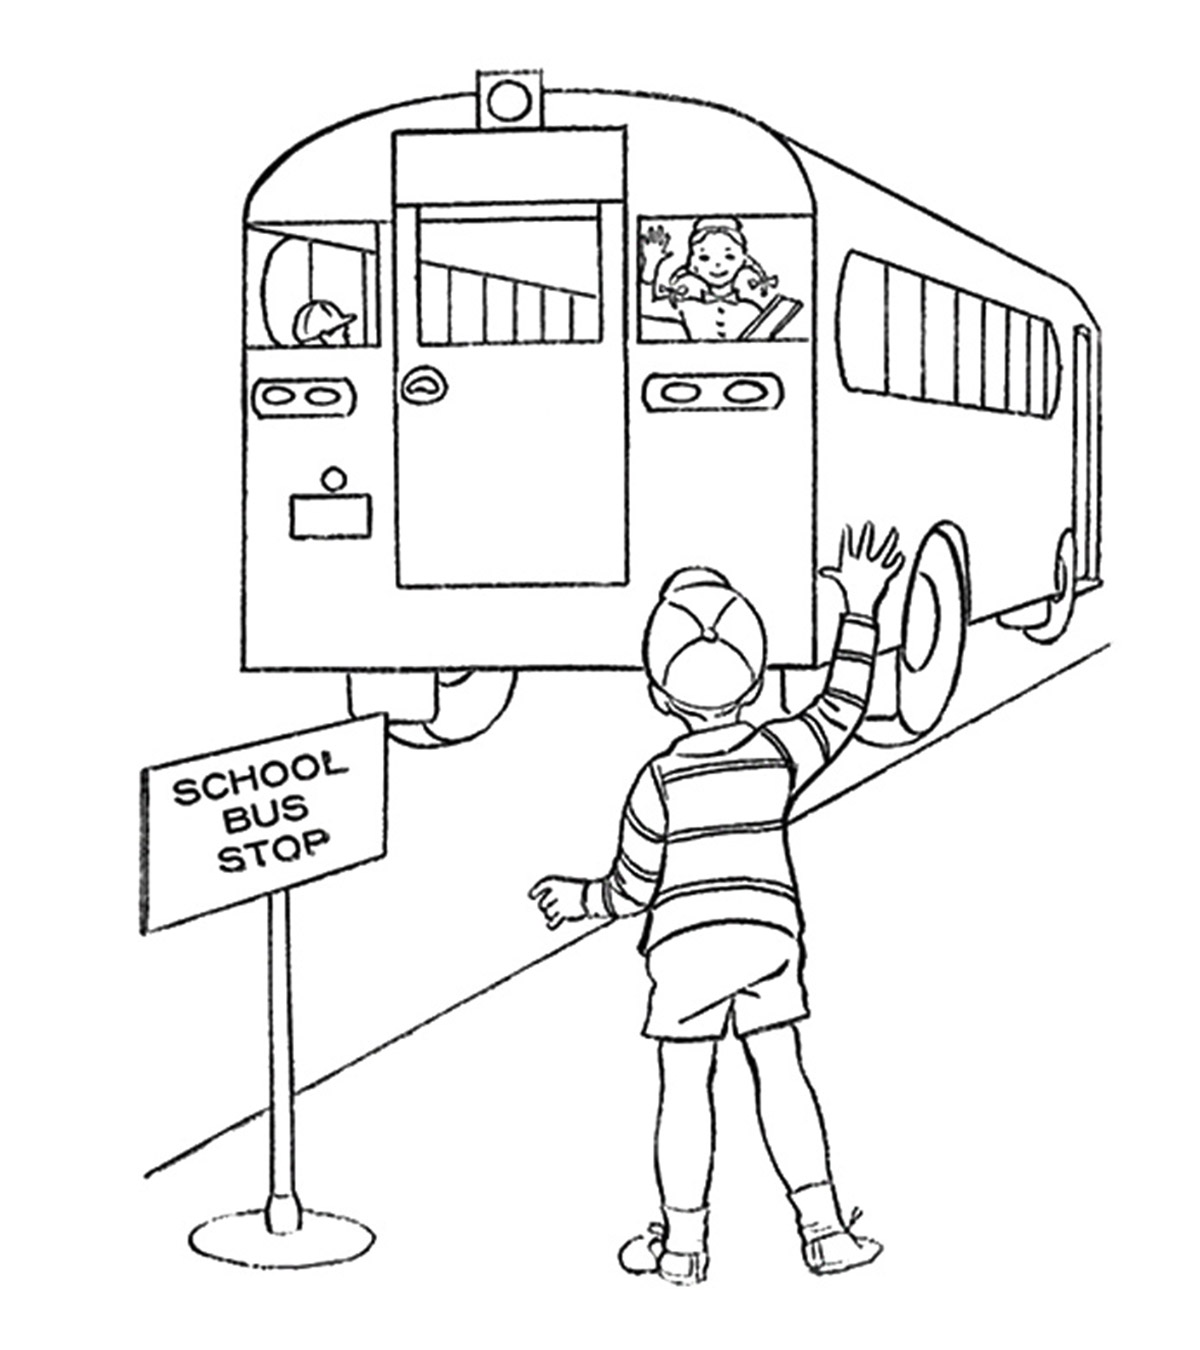 Top 10 School Bus Coloring Pages For Your Little Ones